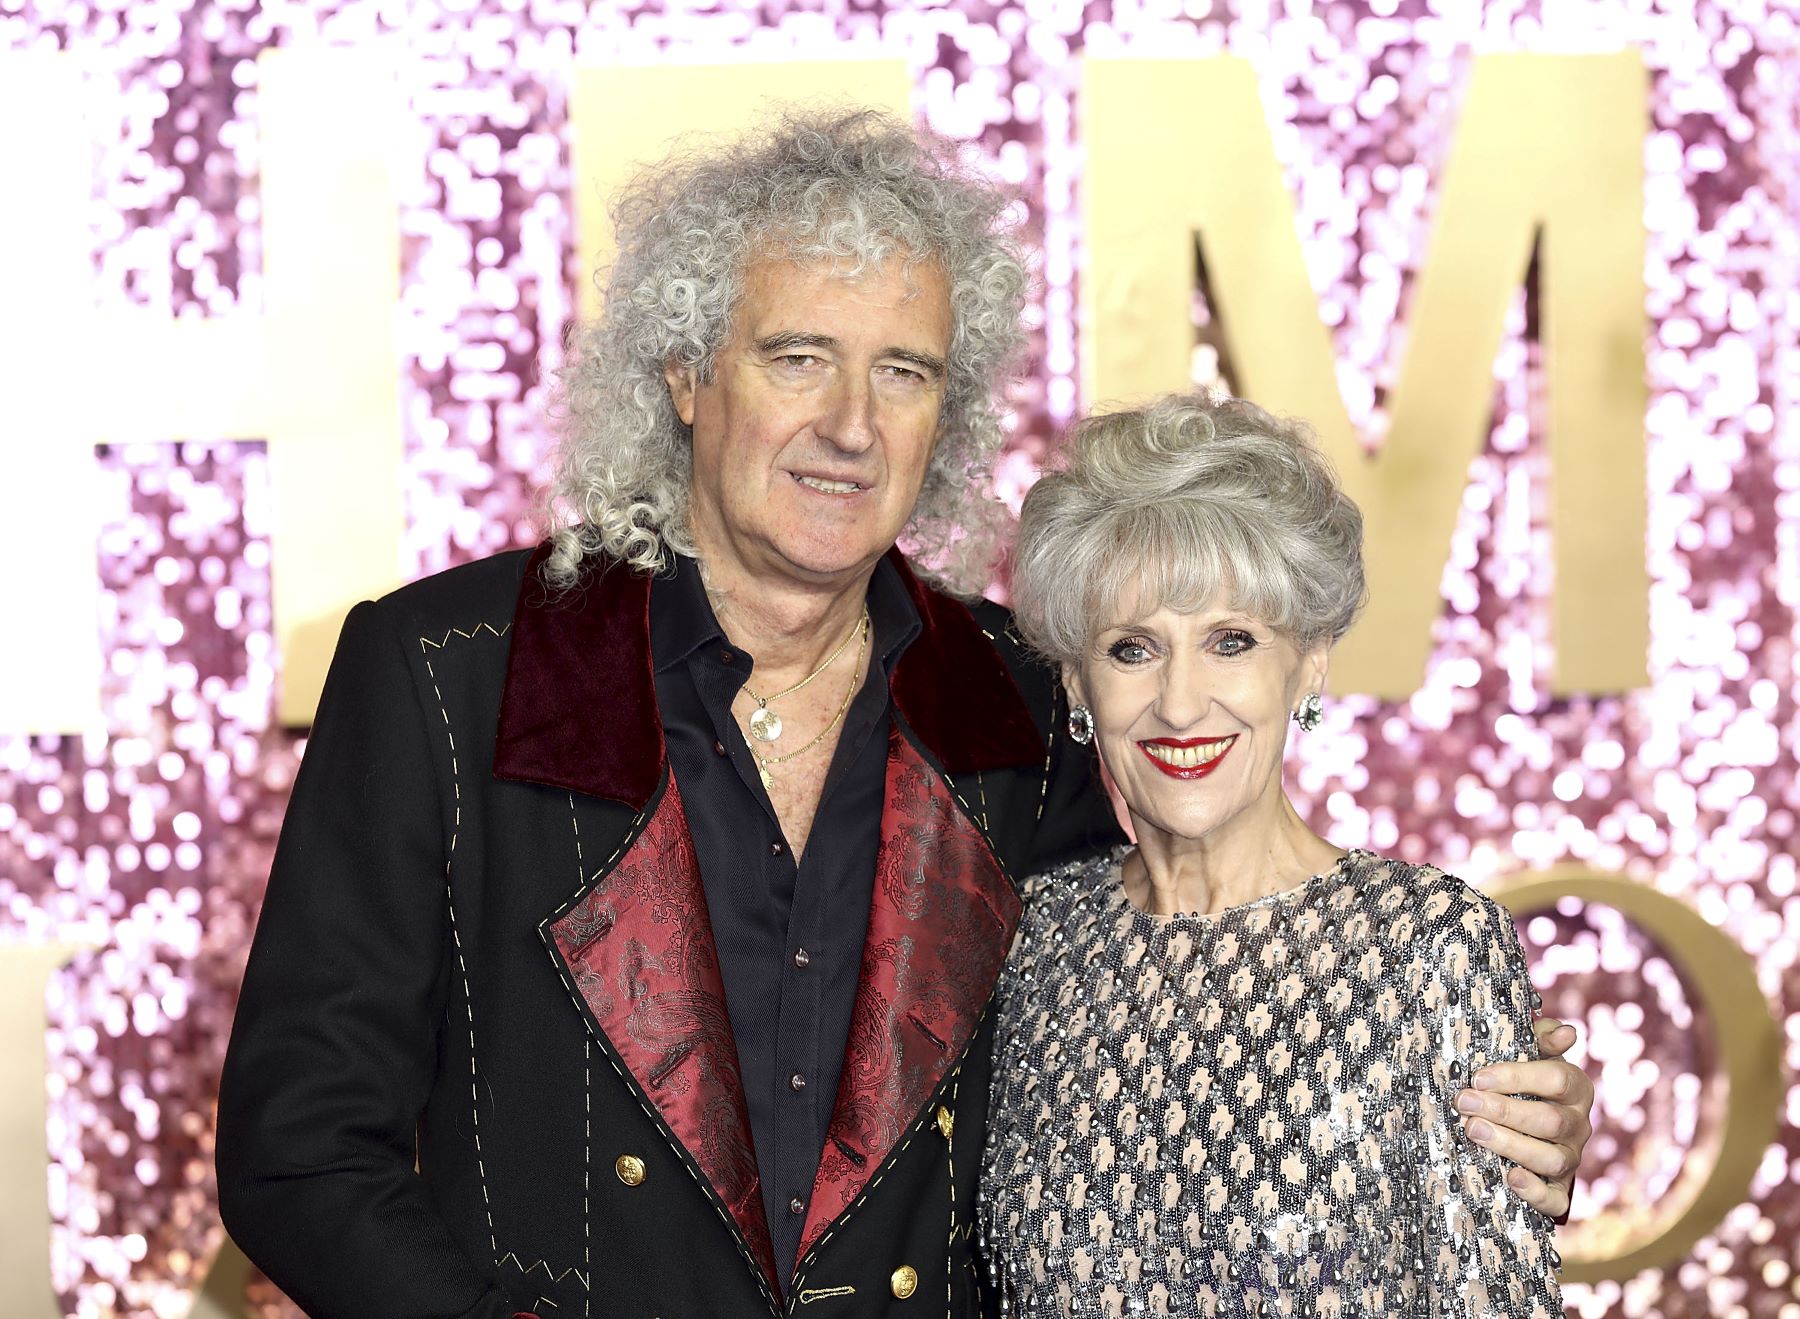 Brian May and his wife Anita Dobson at the world premiere of 'Bohemian Rhapsody' in London, England